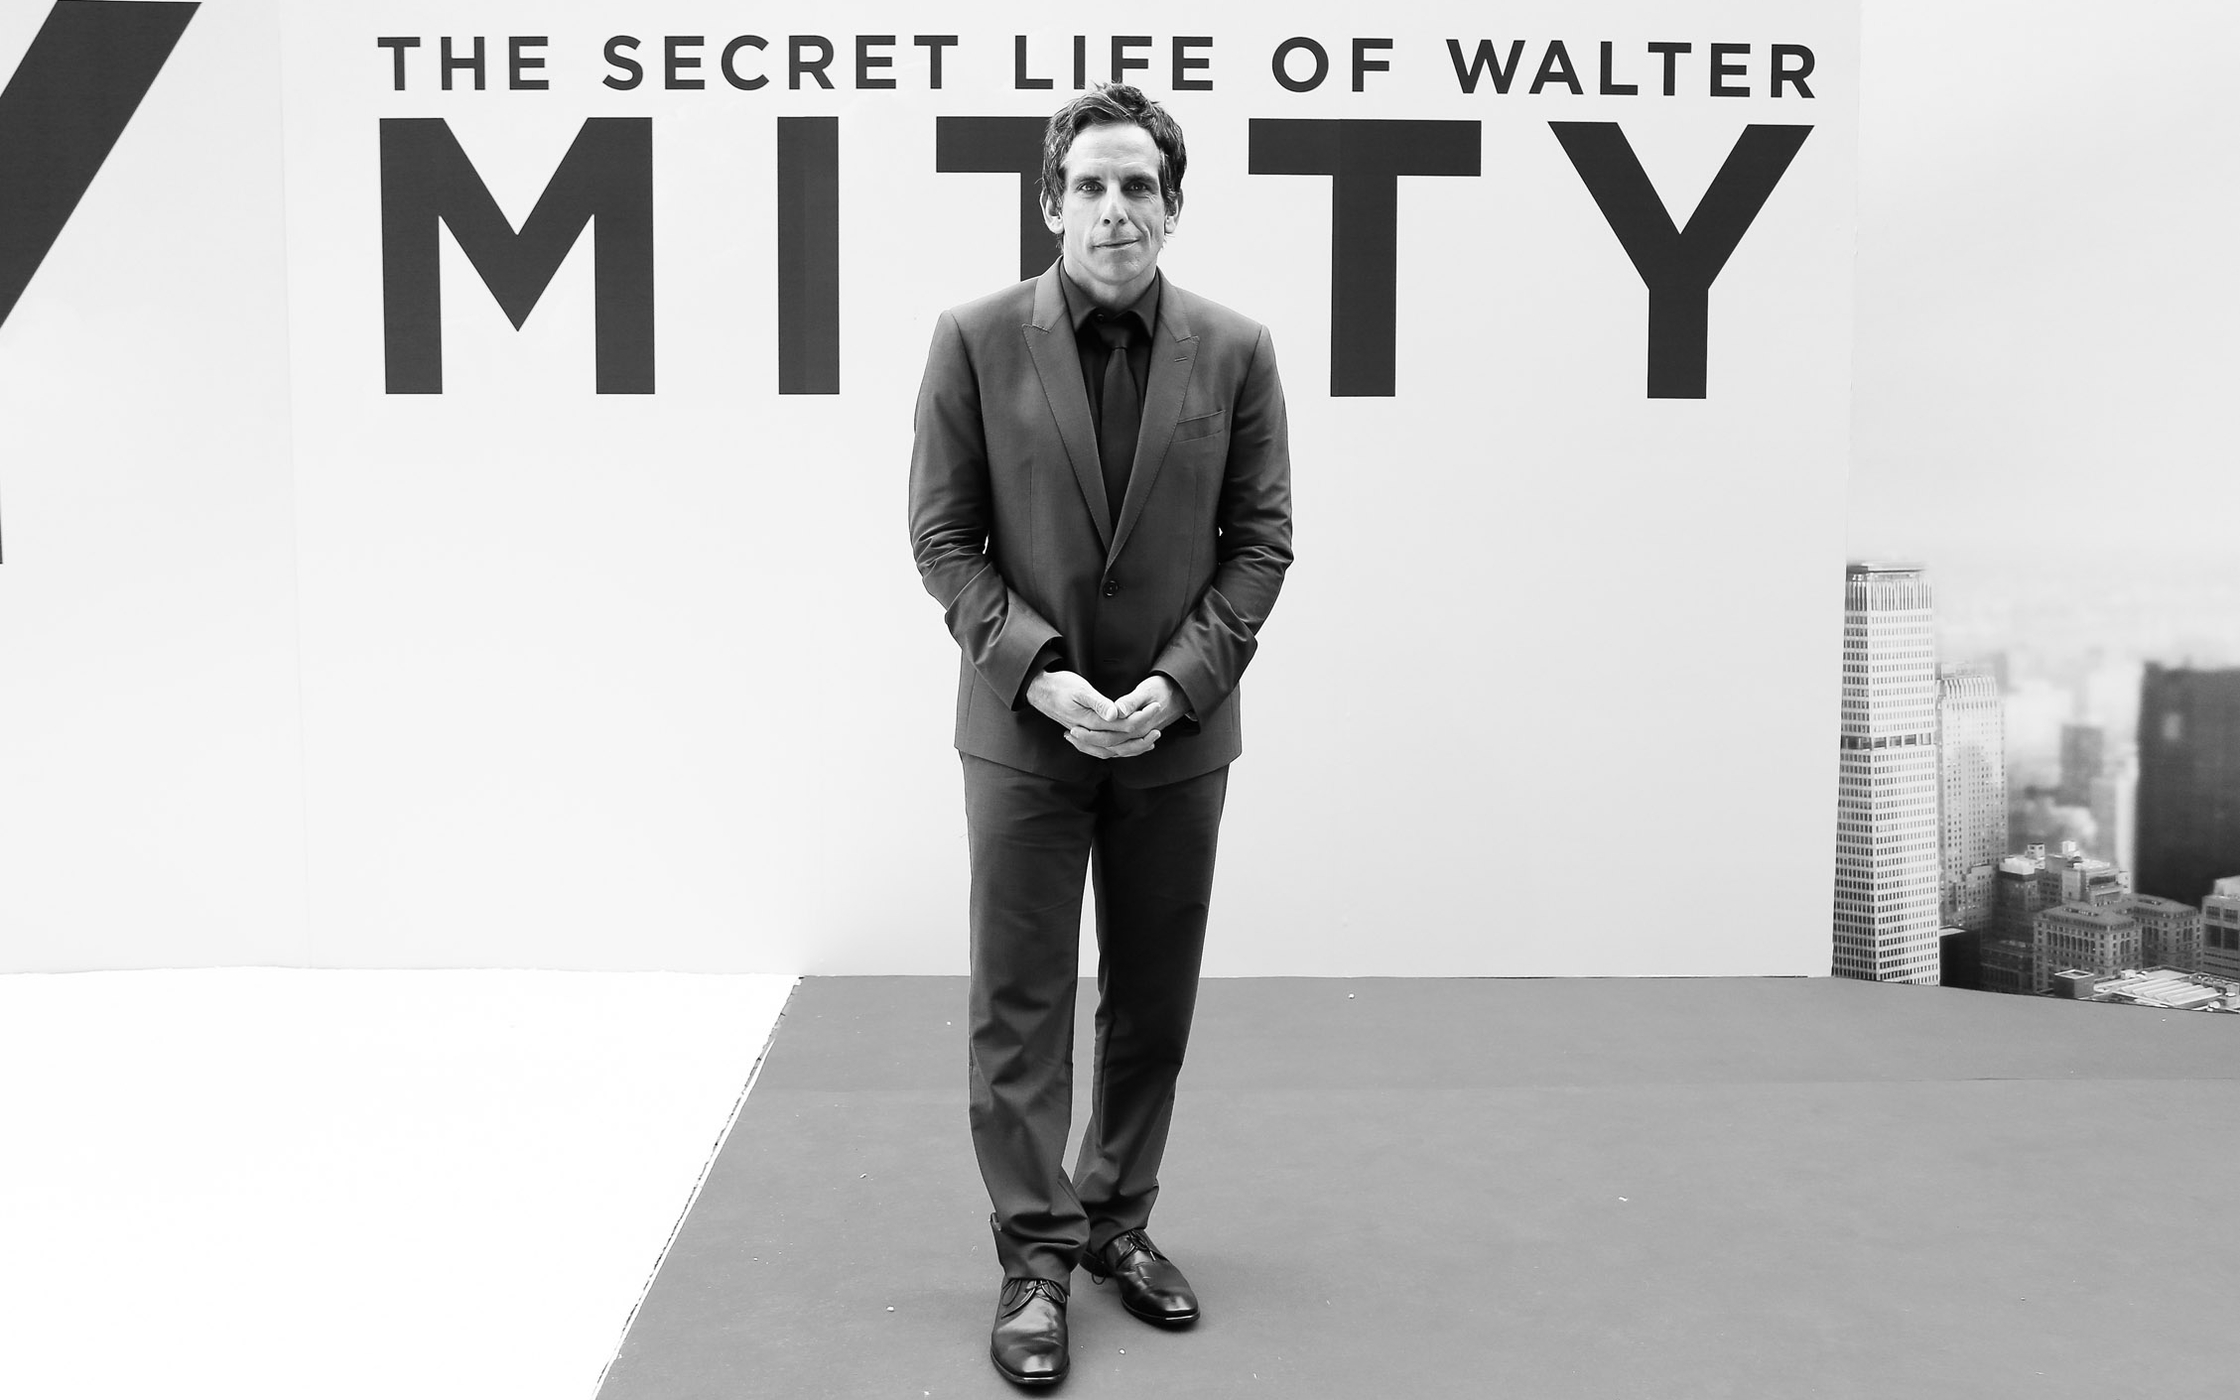 walter mitty wallpaper,text,album cover,suit,snapshot,font